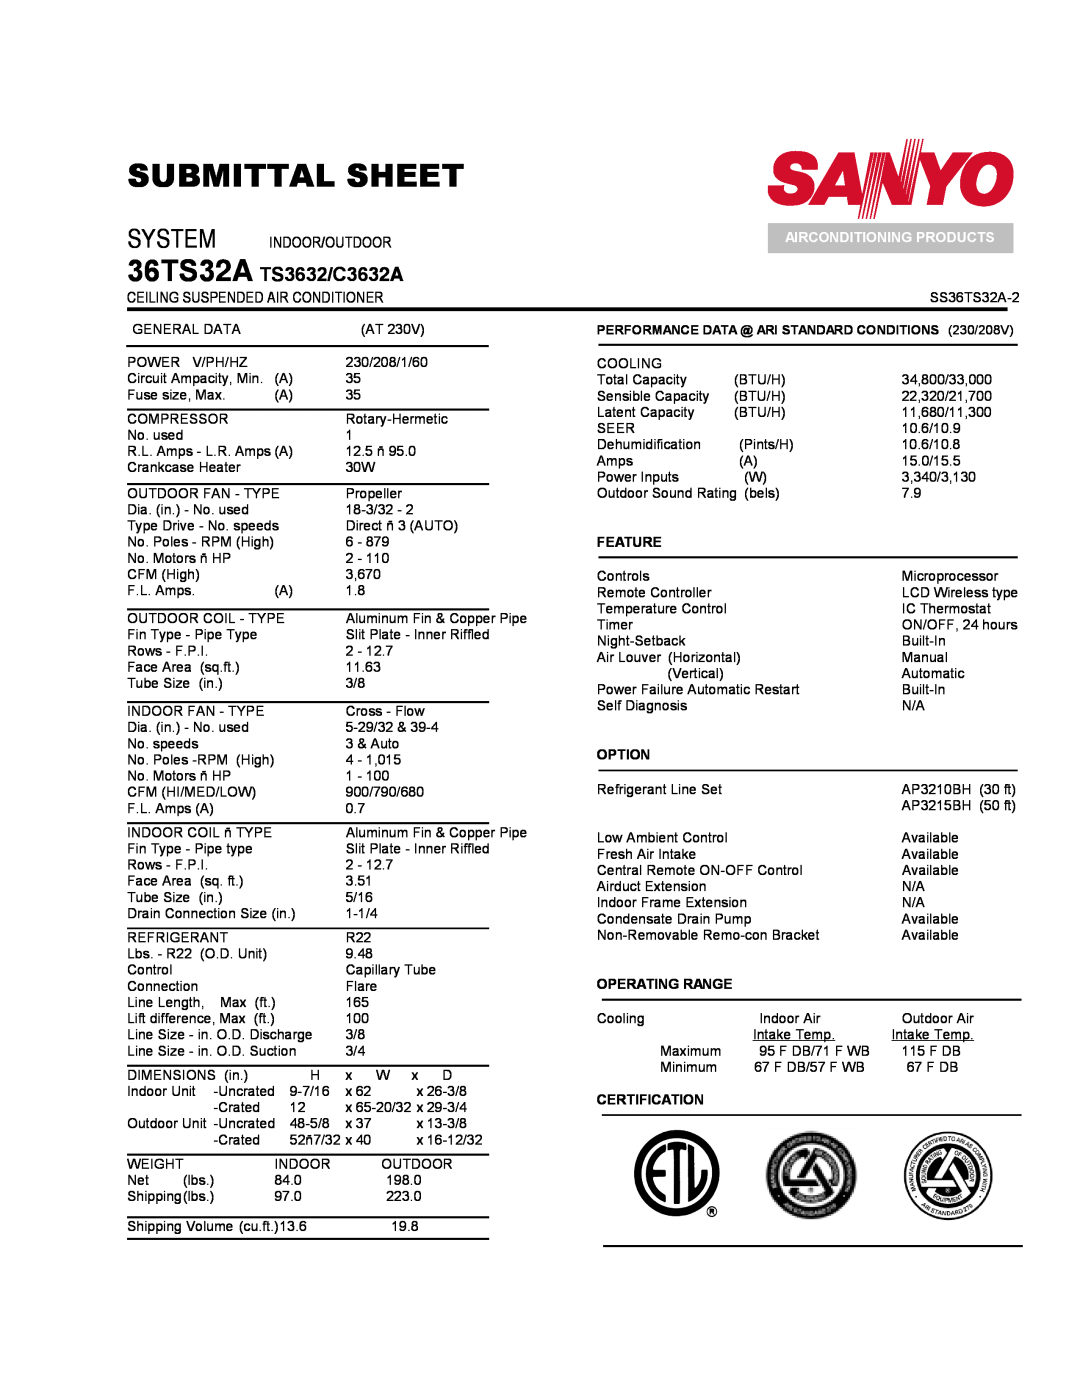 Sanyo dimensions Submittal Sheet, 36TS32A TS3632/C3632A, System Indoor/Outdoor, Ceiling Suspended Air Conditioner 